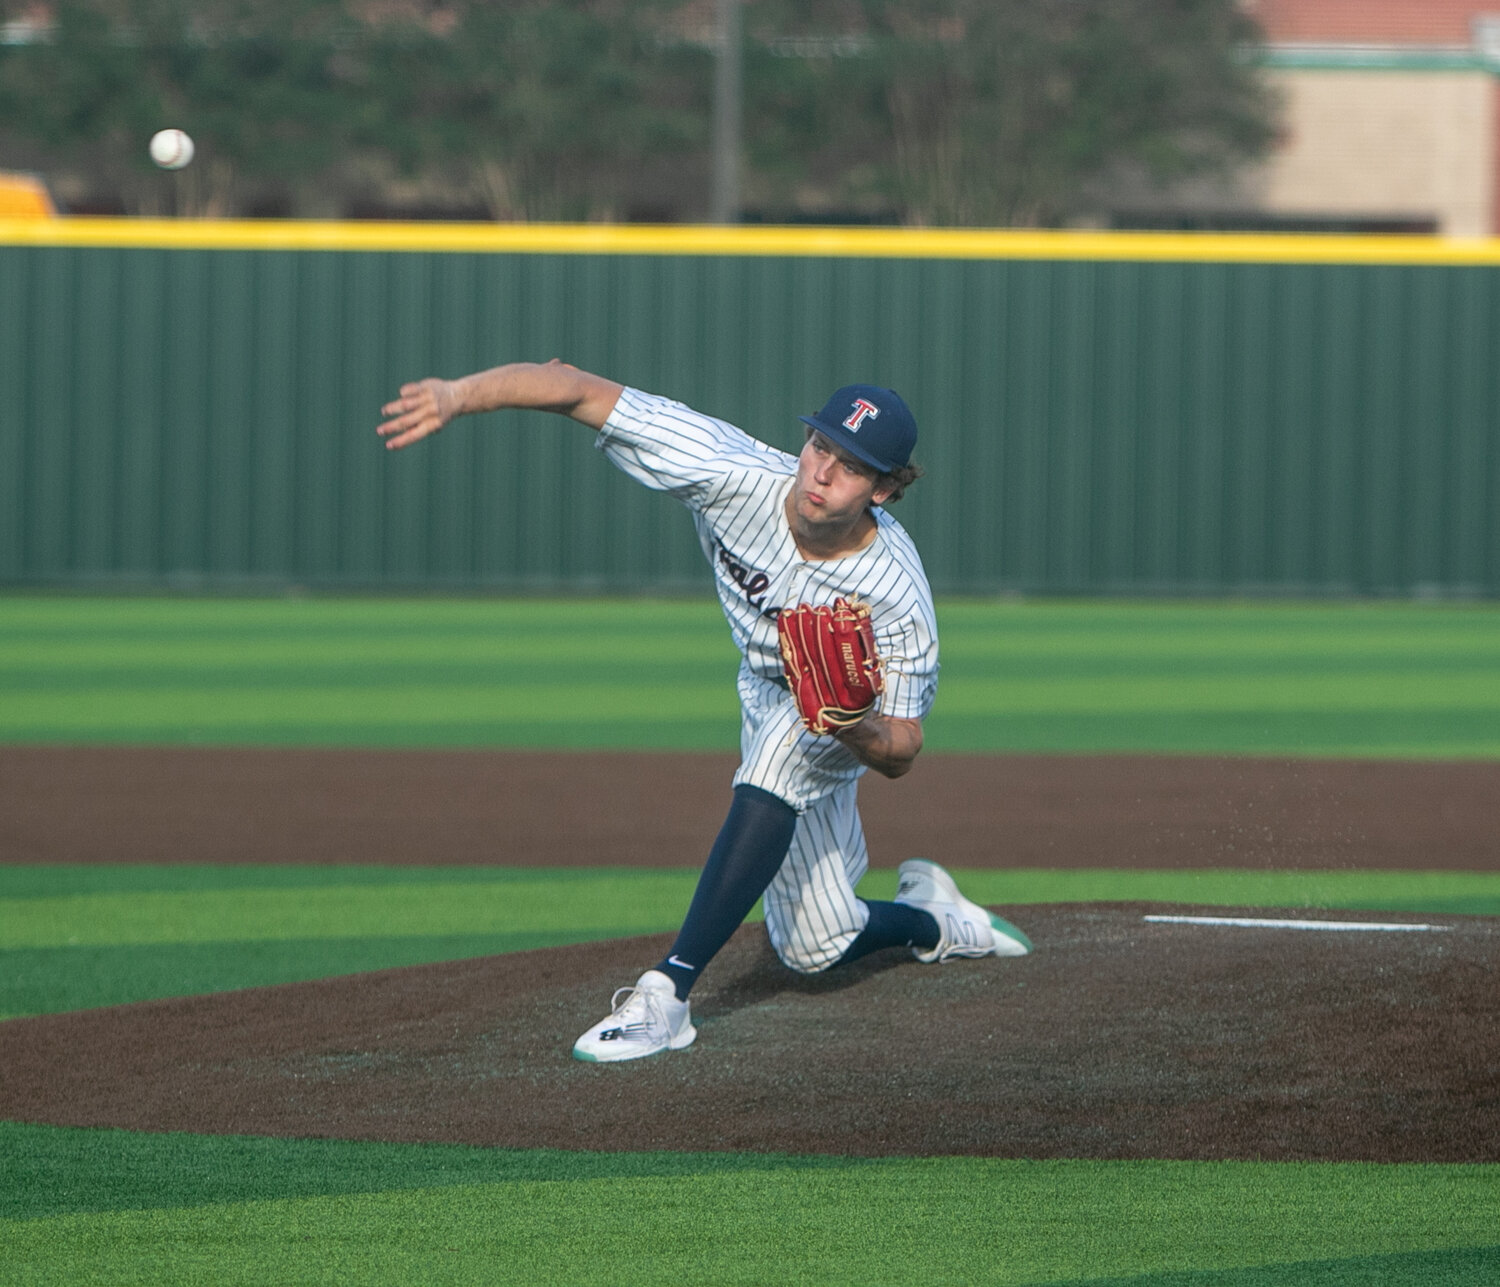 Hudson Maelerts pitches during Saturday's Regional Quarterfinal between Katy and Tompkins at Cy-Springs.